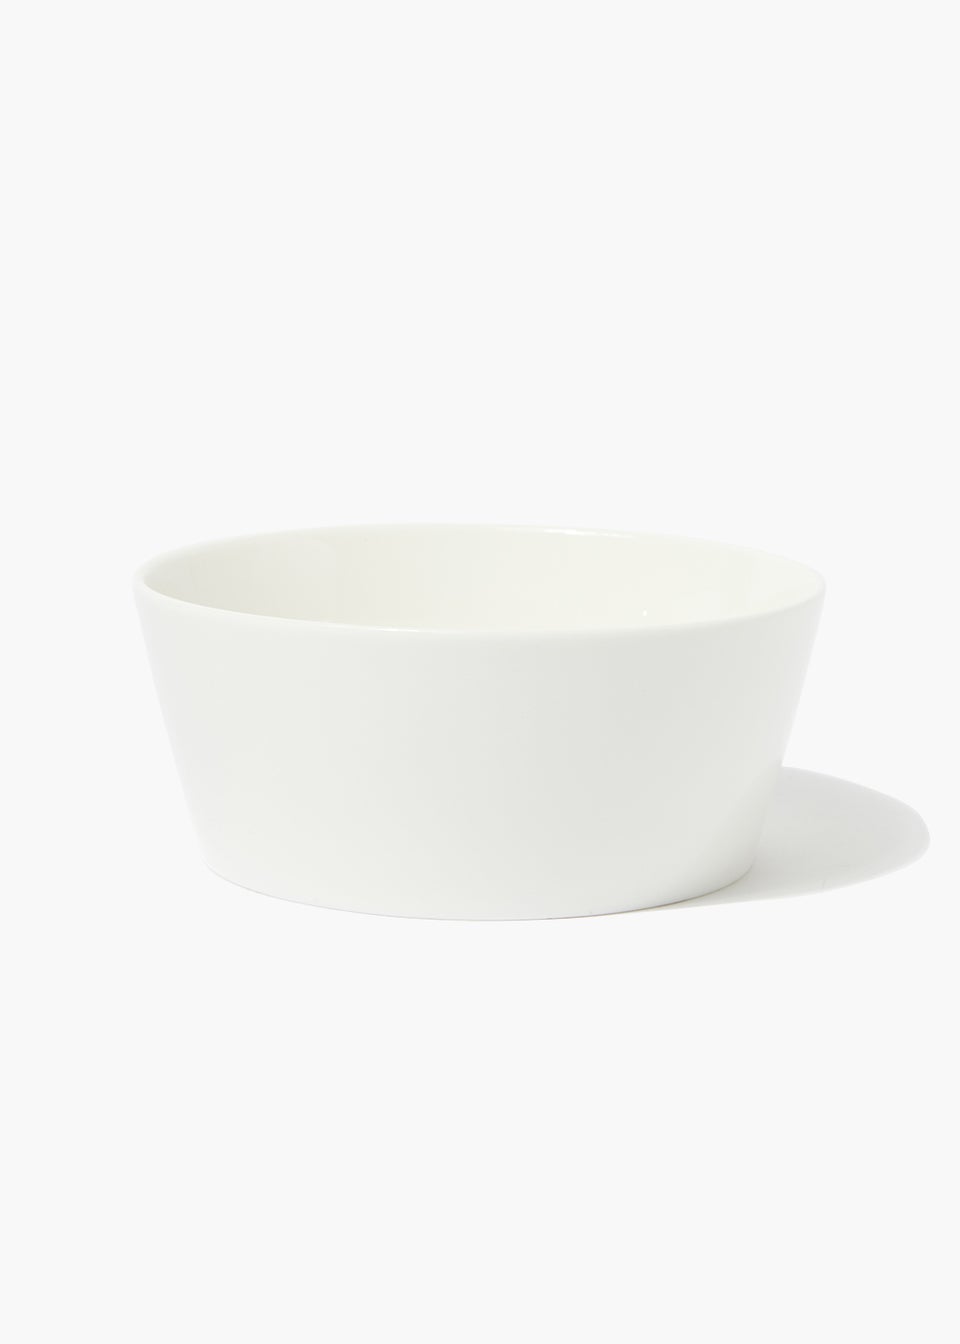 White Lipped Cereal Bowl (15cm x 6.5cm)